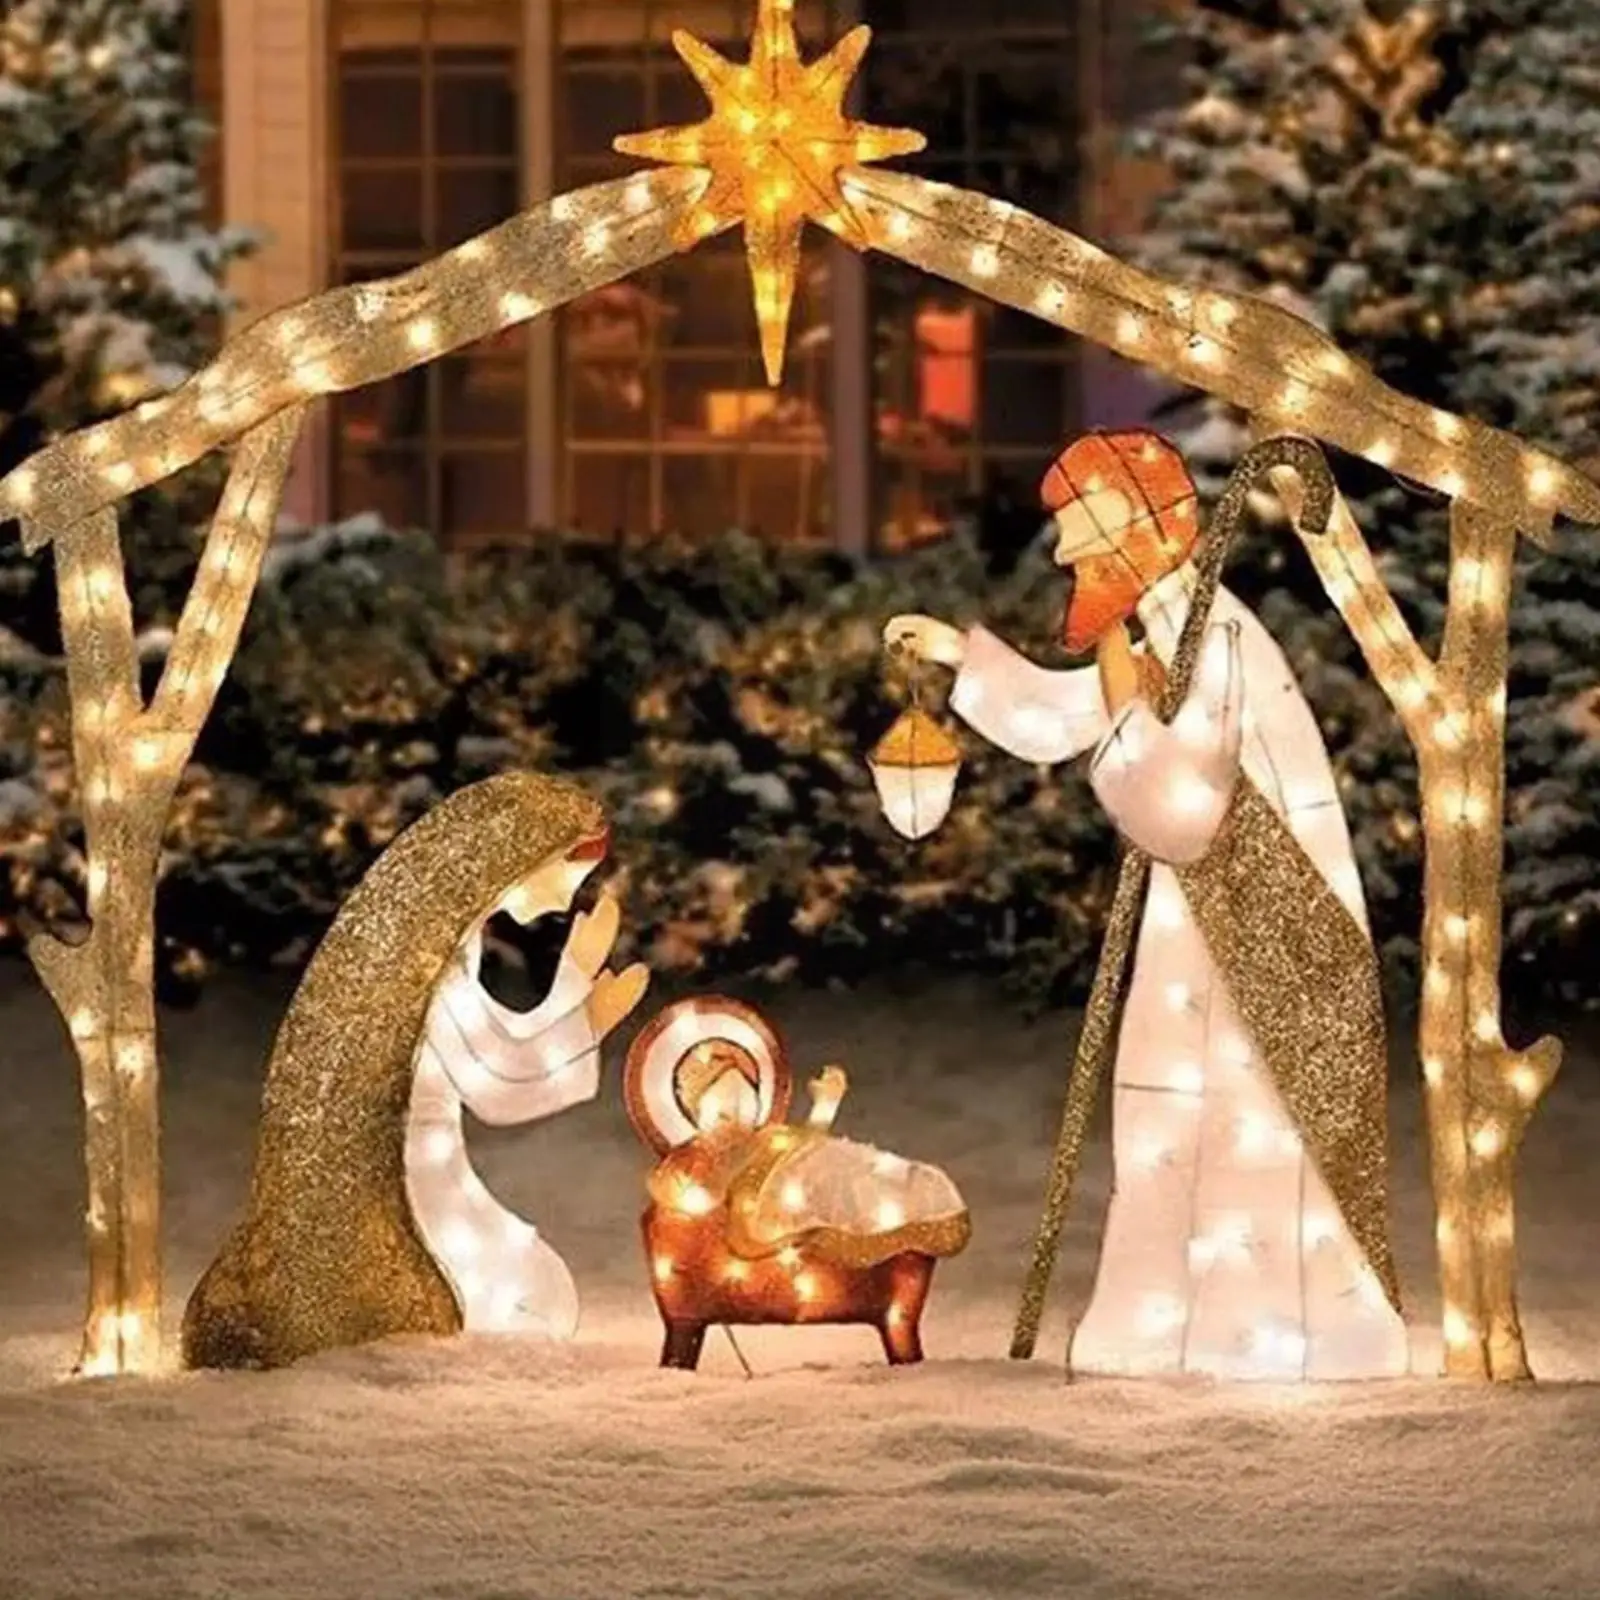 

Tinsel Nativity Scene Warm White Yard Plane Painting For Easter Christmas Outdoor Yard Garden Decorations Event Decoration D2U7